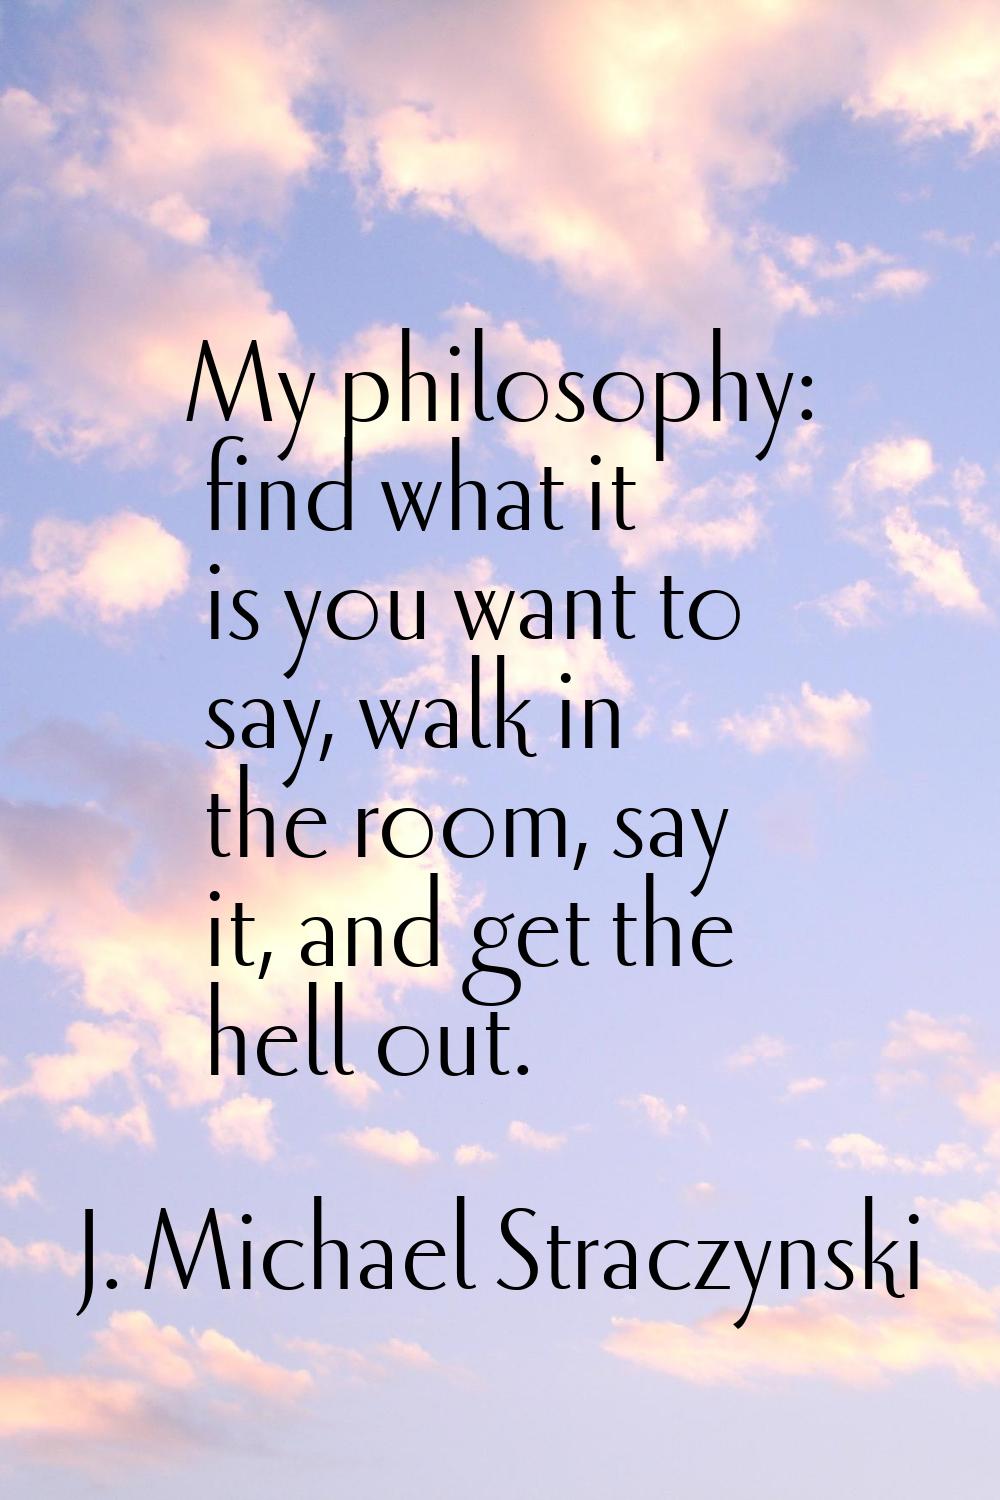 My philosophy: find what it is you want to say, walk in the room, say it, and get the hell out.